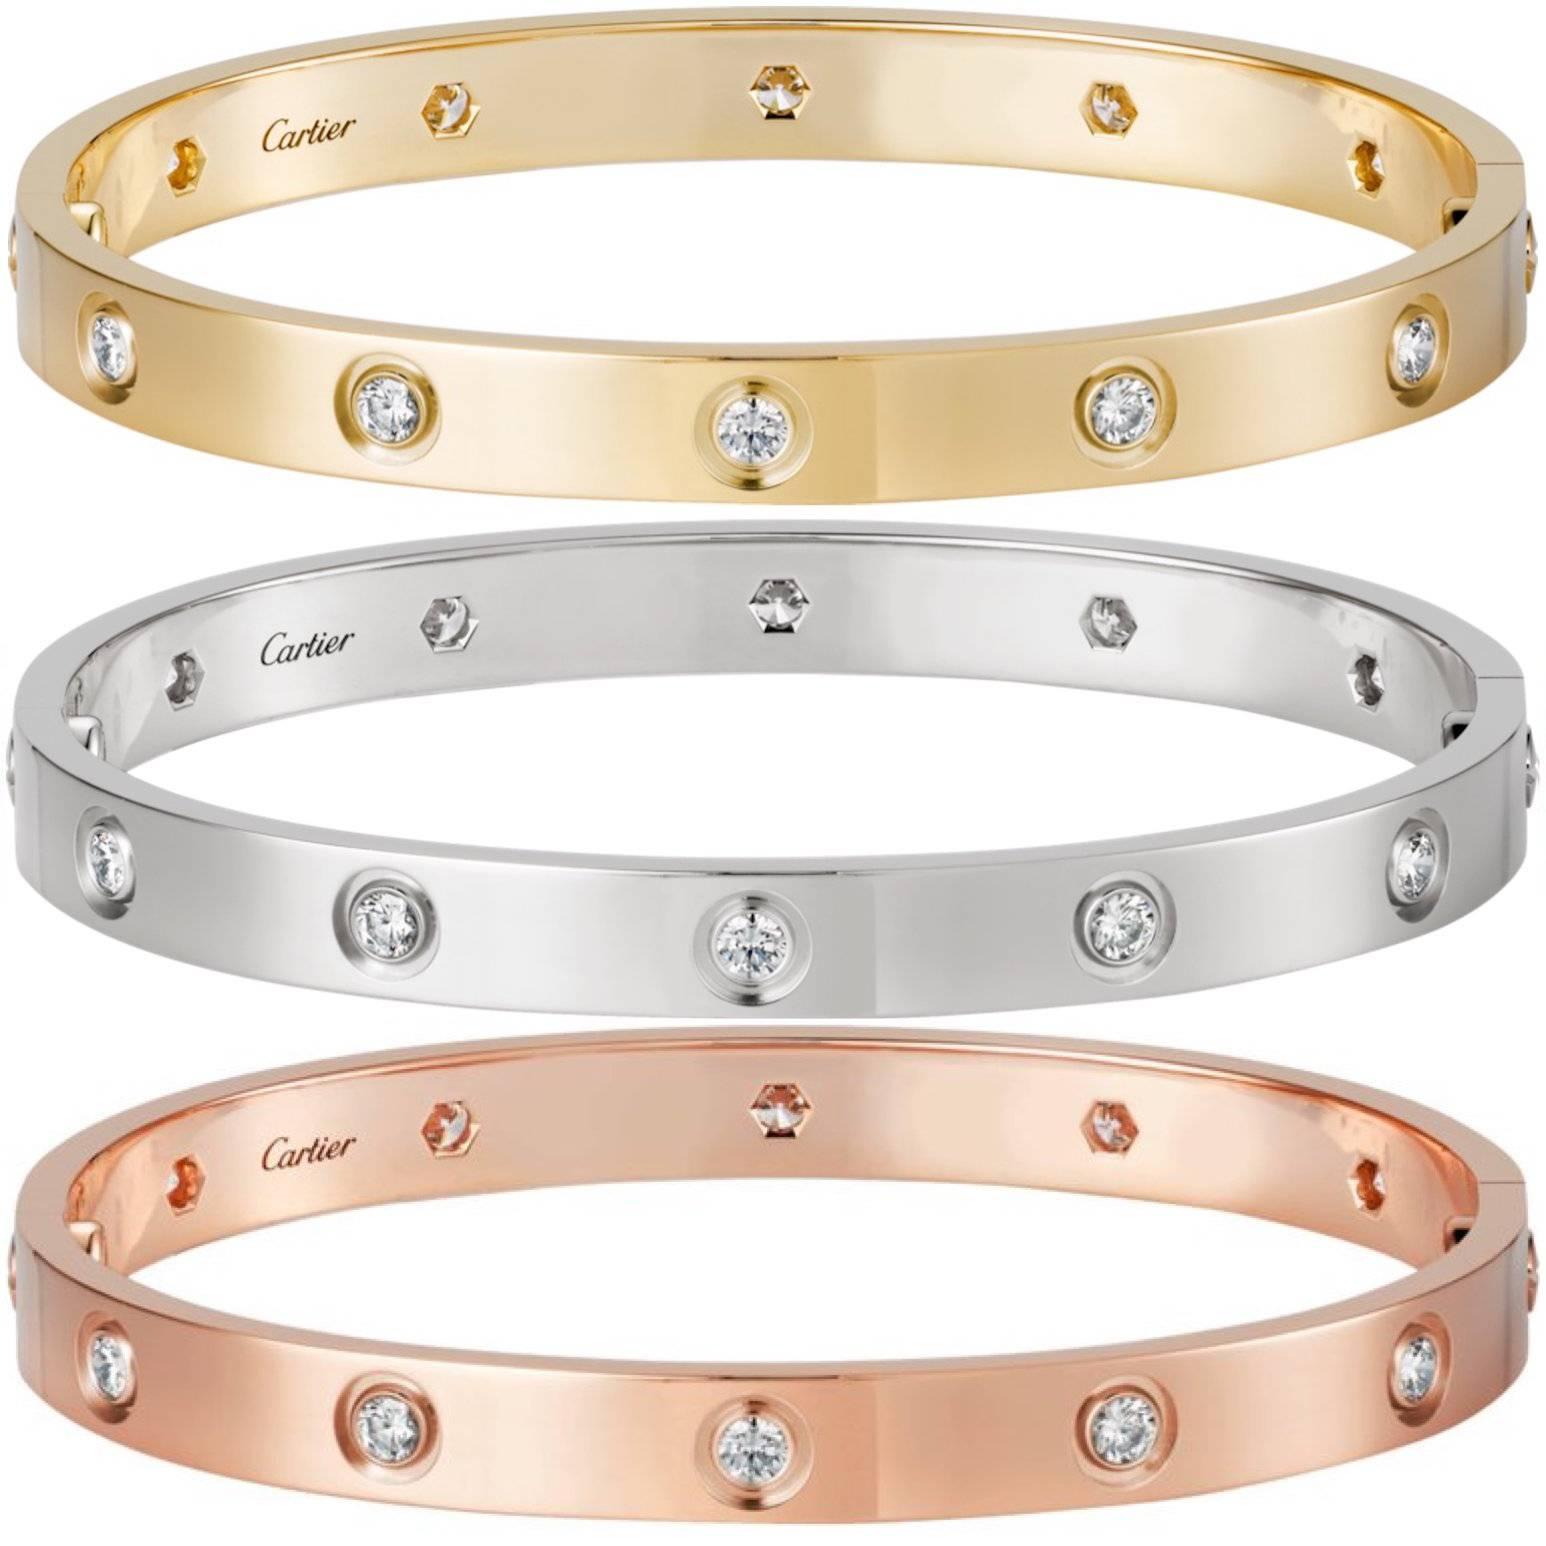 Cartier Love Three Bracelets Trinity Pink, White and Yellow Gold Bangles 